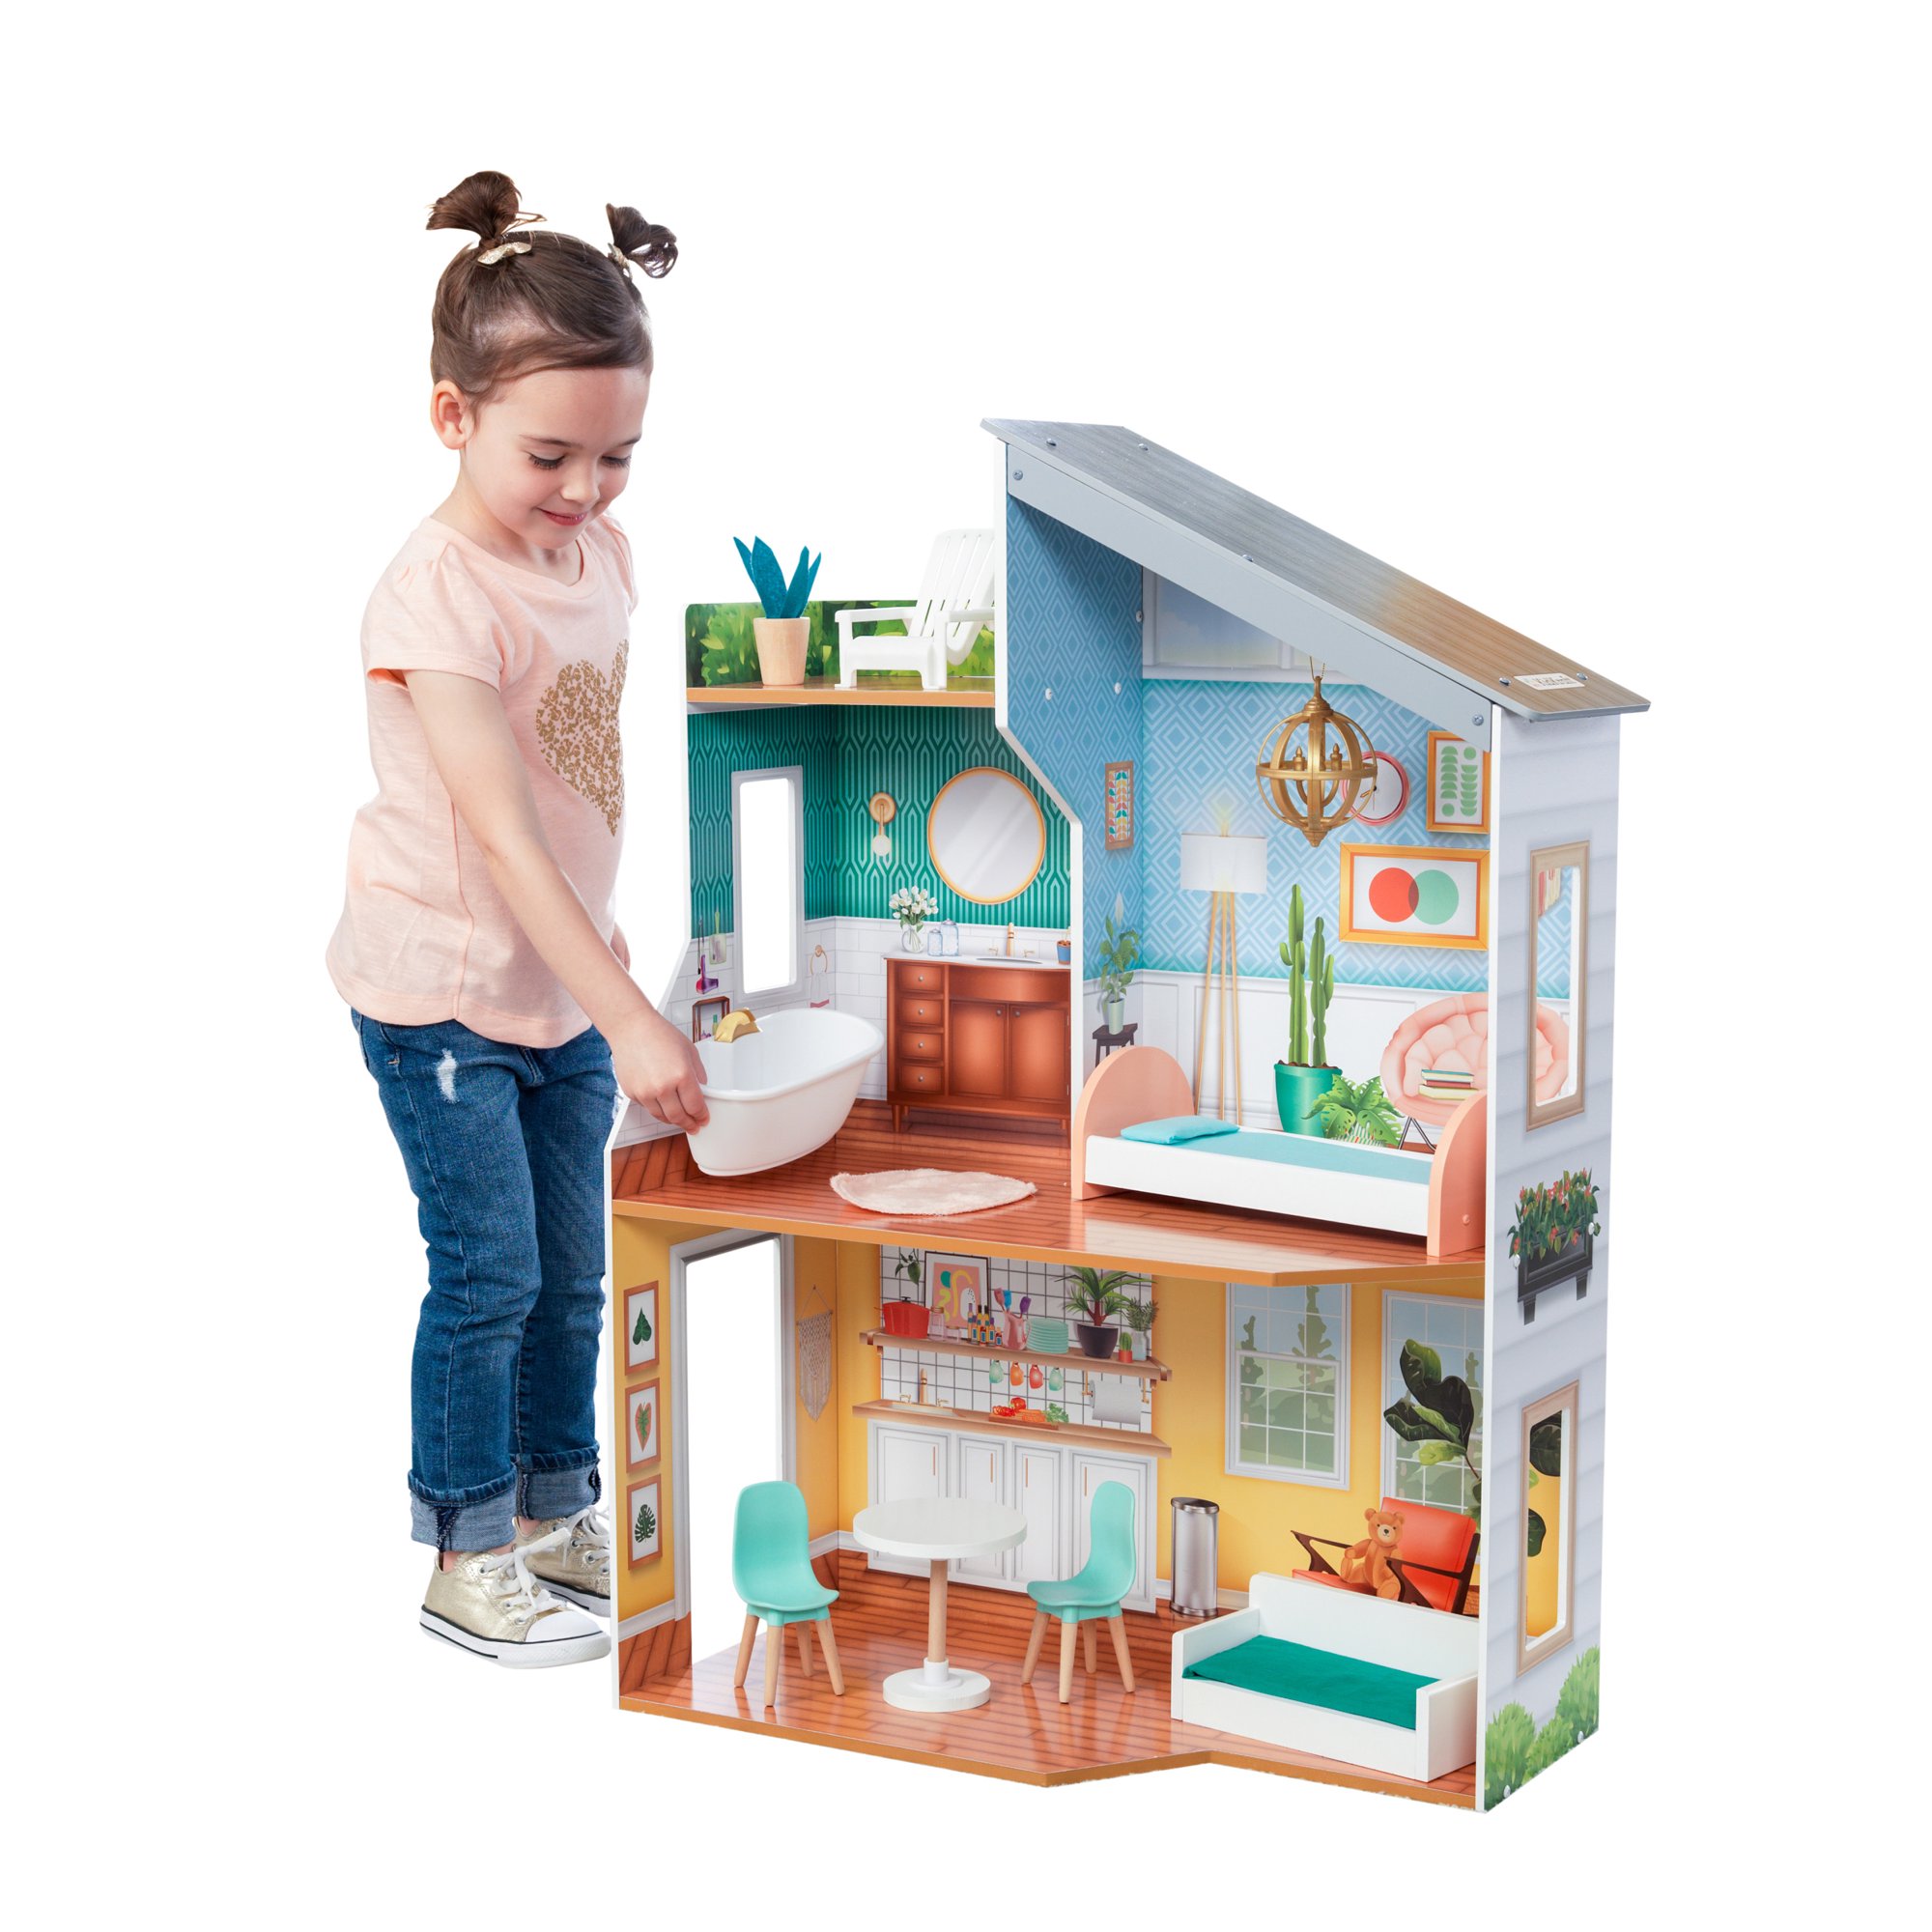 KidKraft Emily Wooden Dollhouse w/ 10 Accessories $41.65 + Free Shipping